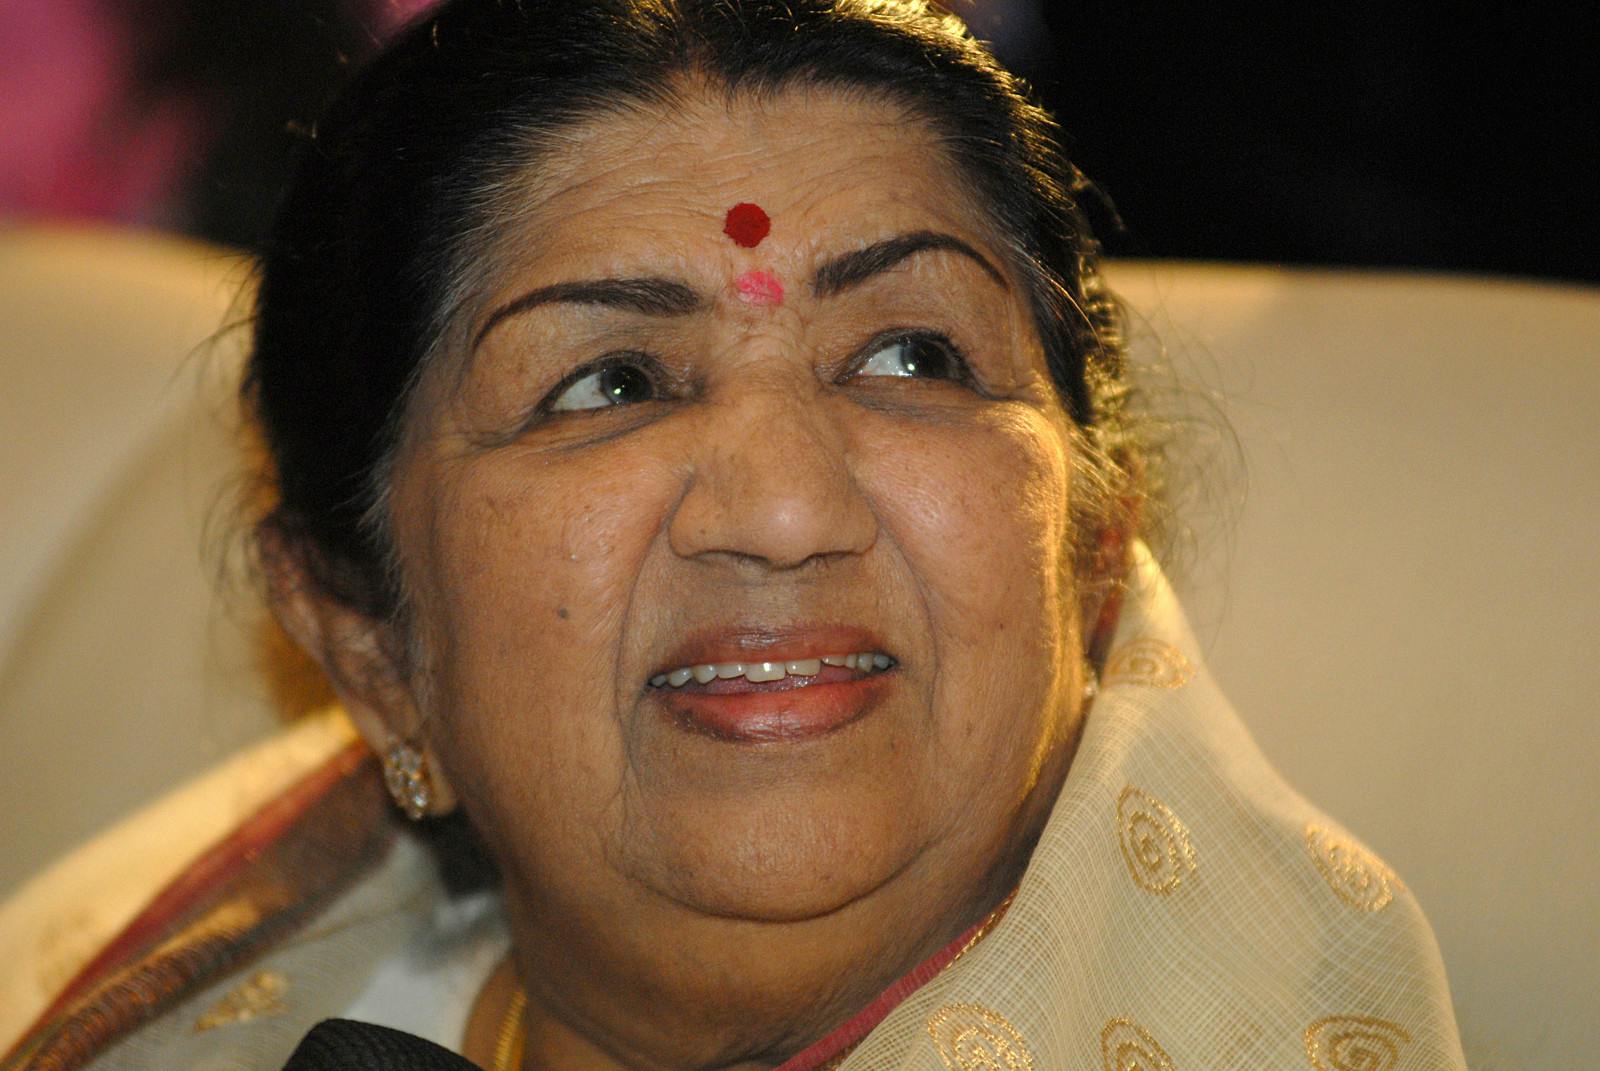 Lata Mangeshkar attends the TV reality show 'Voice of India' Grand Finale on November 24, 2007 in Mumbai, India. (Prodip Guha/Getty Images)
